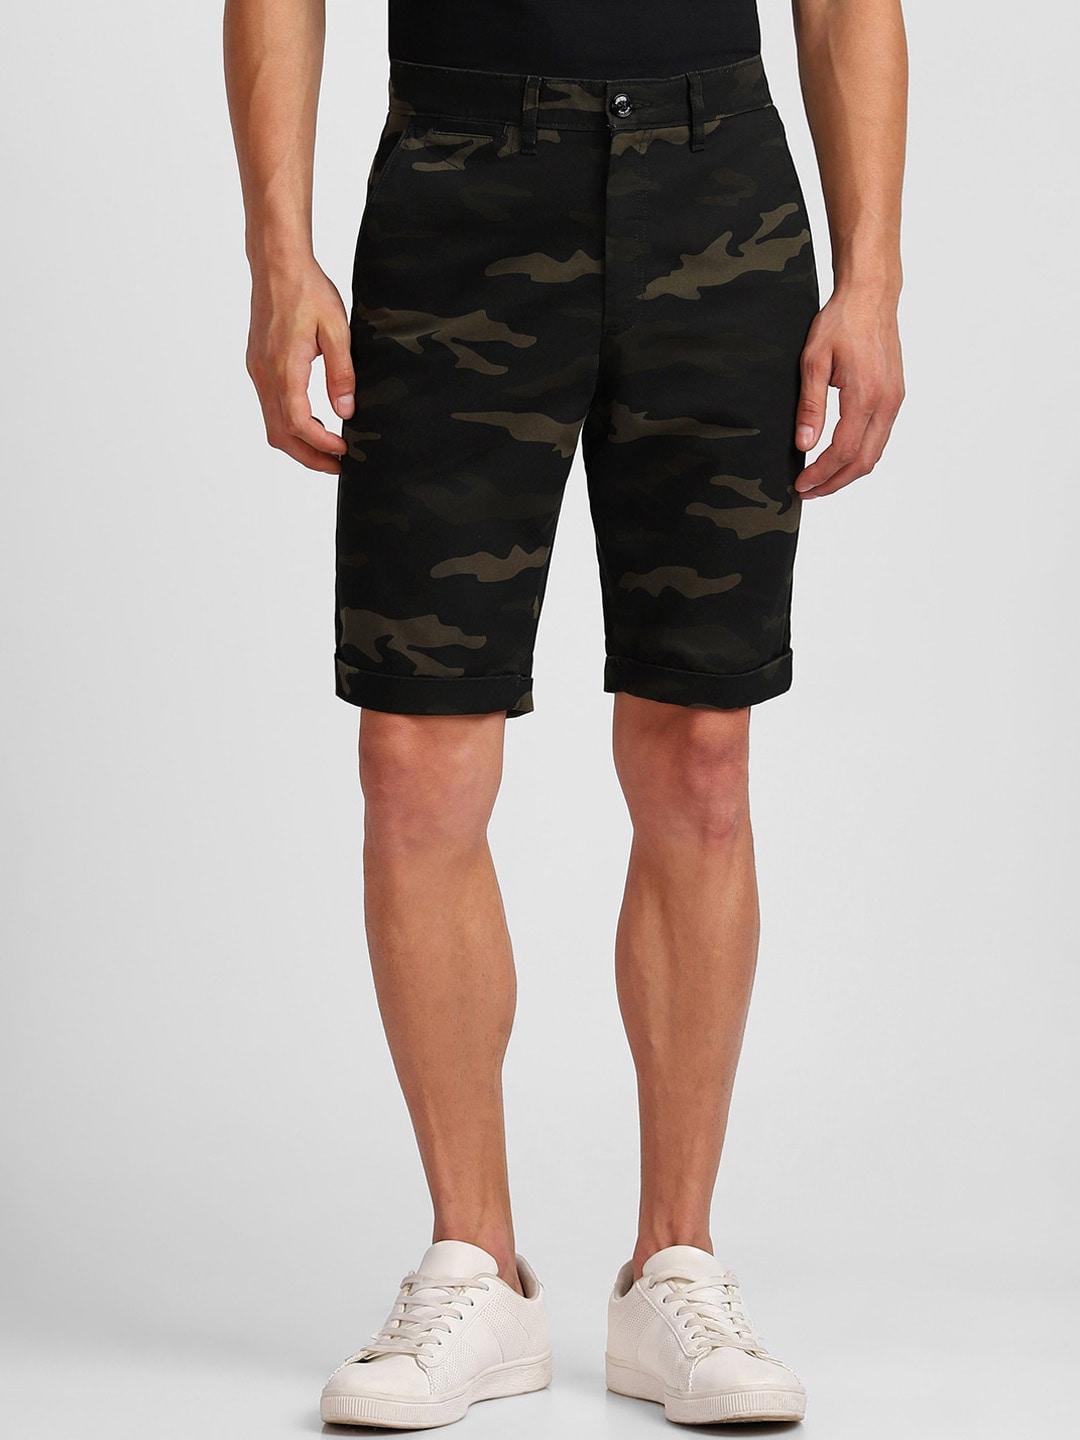 allen solly men camouflage printed cotton slim fit shorts